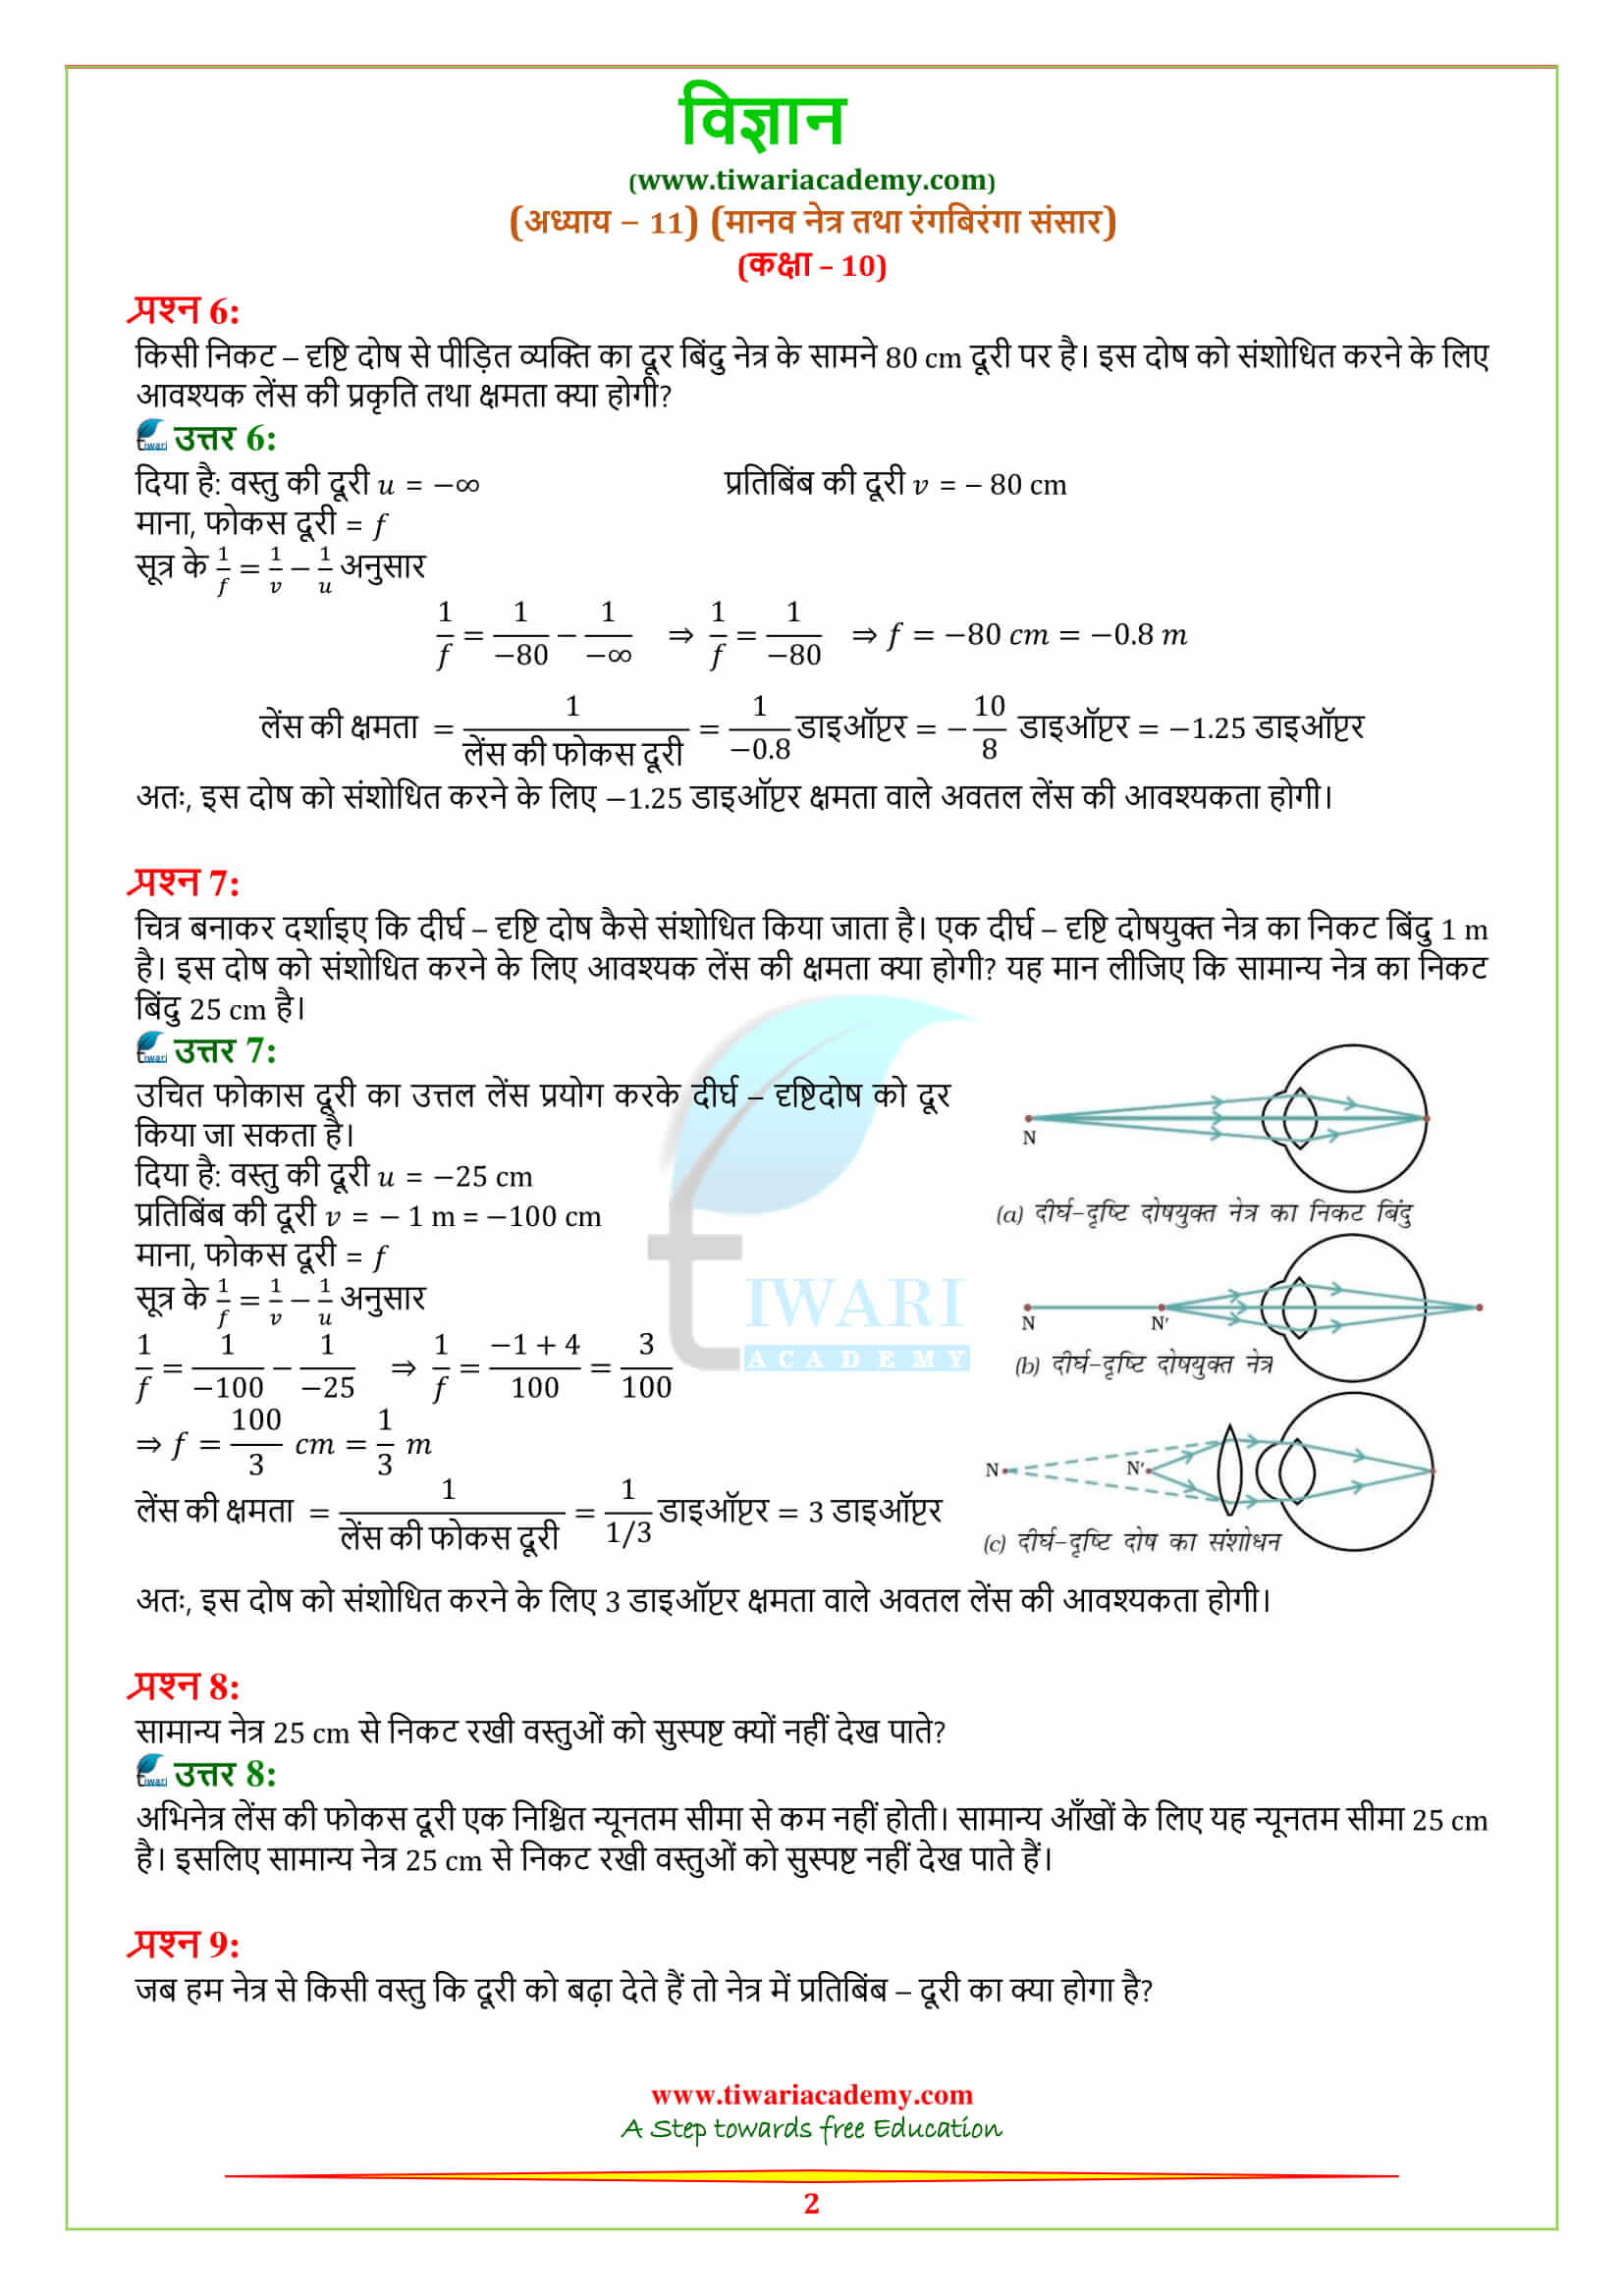 NCERT Solutions for Class 10 Science Chapter 11 Human eye and colorful world in hindi medium